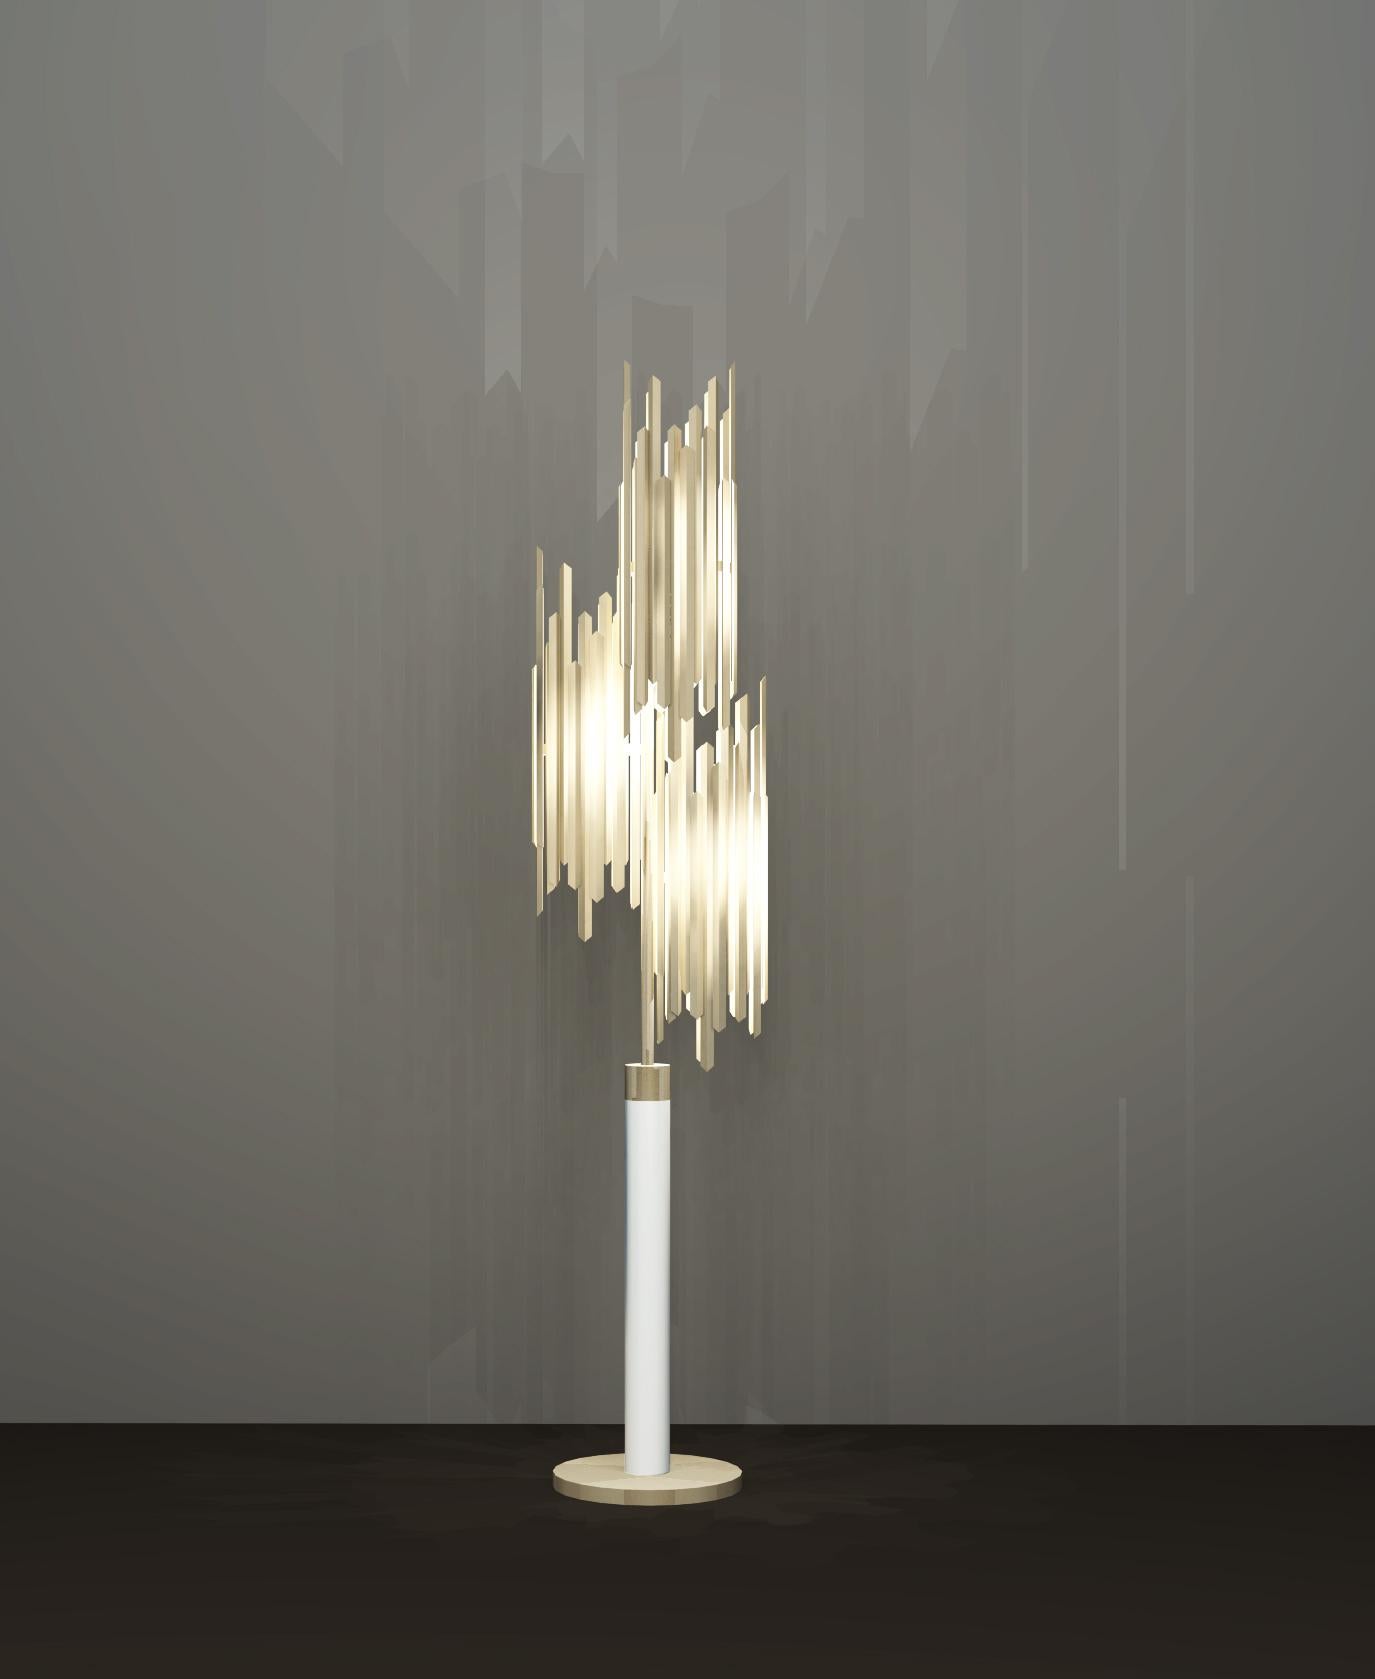 This floor lamp is part of a visionary collection that uses the exceptional qualities of brass and the fascinating formation of ice shards to create a chic and unusual collection of lighting perfect for giving an exclusive feel to any